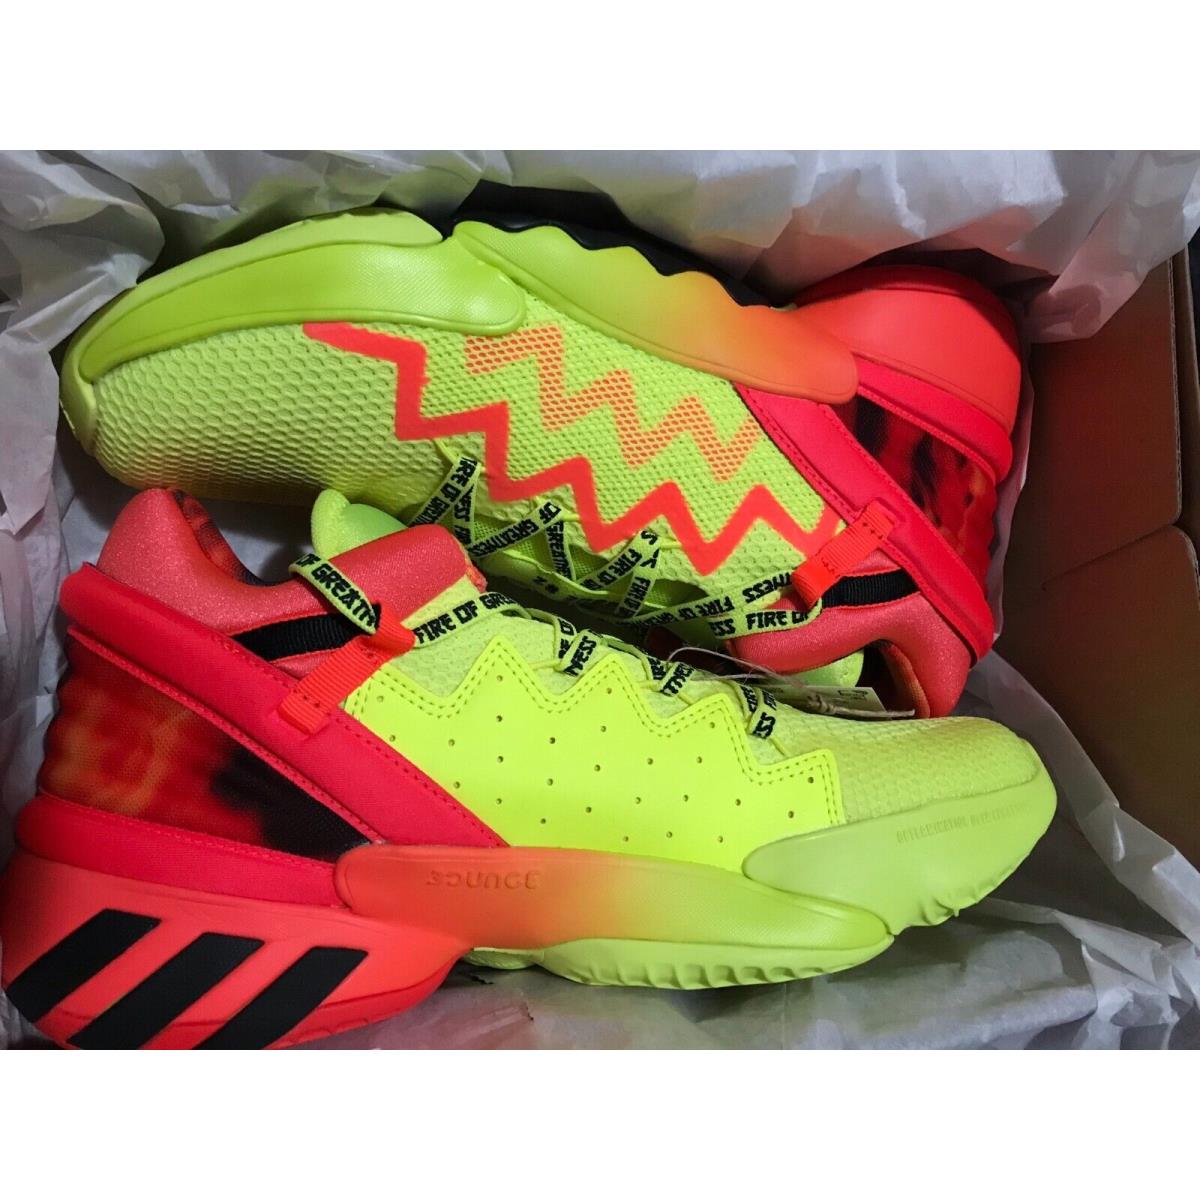 Adidas shoes  - Solar Yellow/Solar Red/Core Black 12